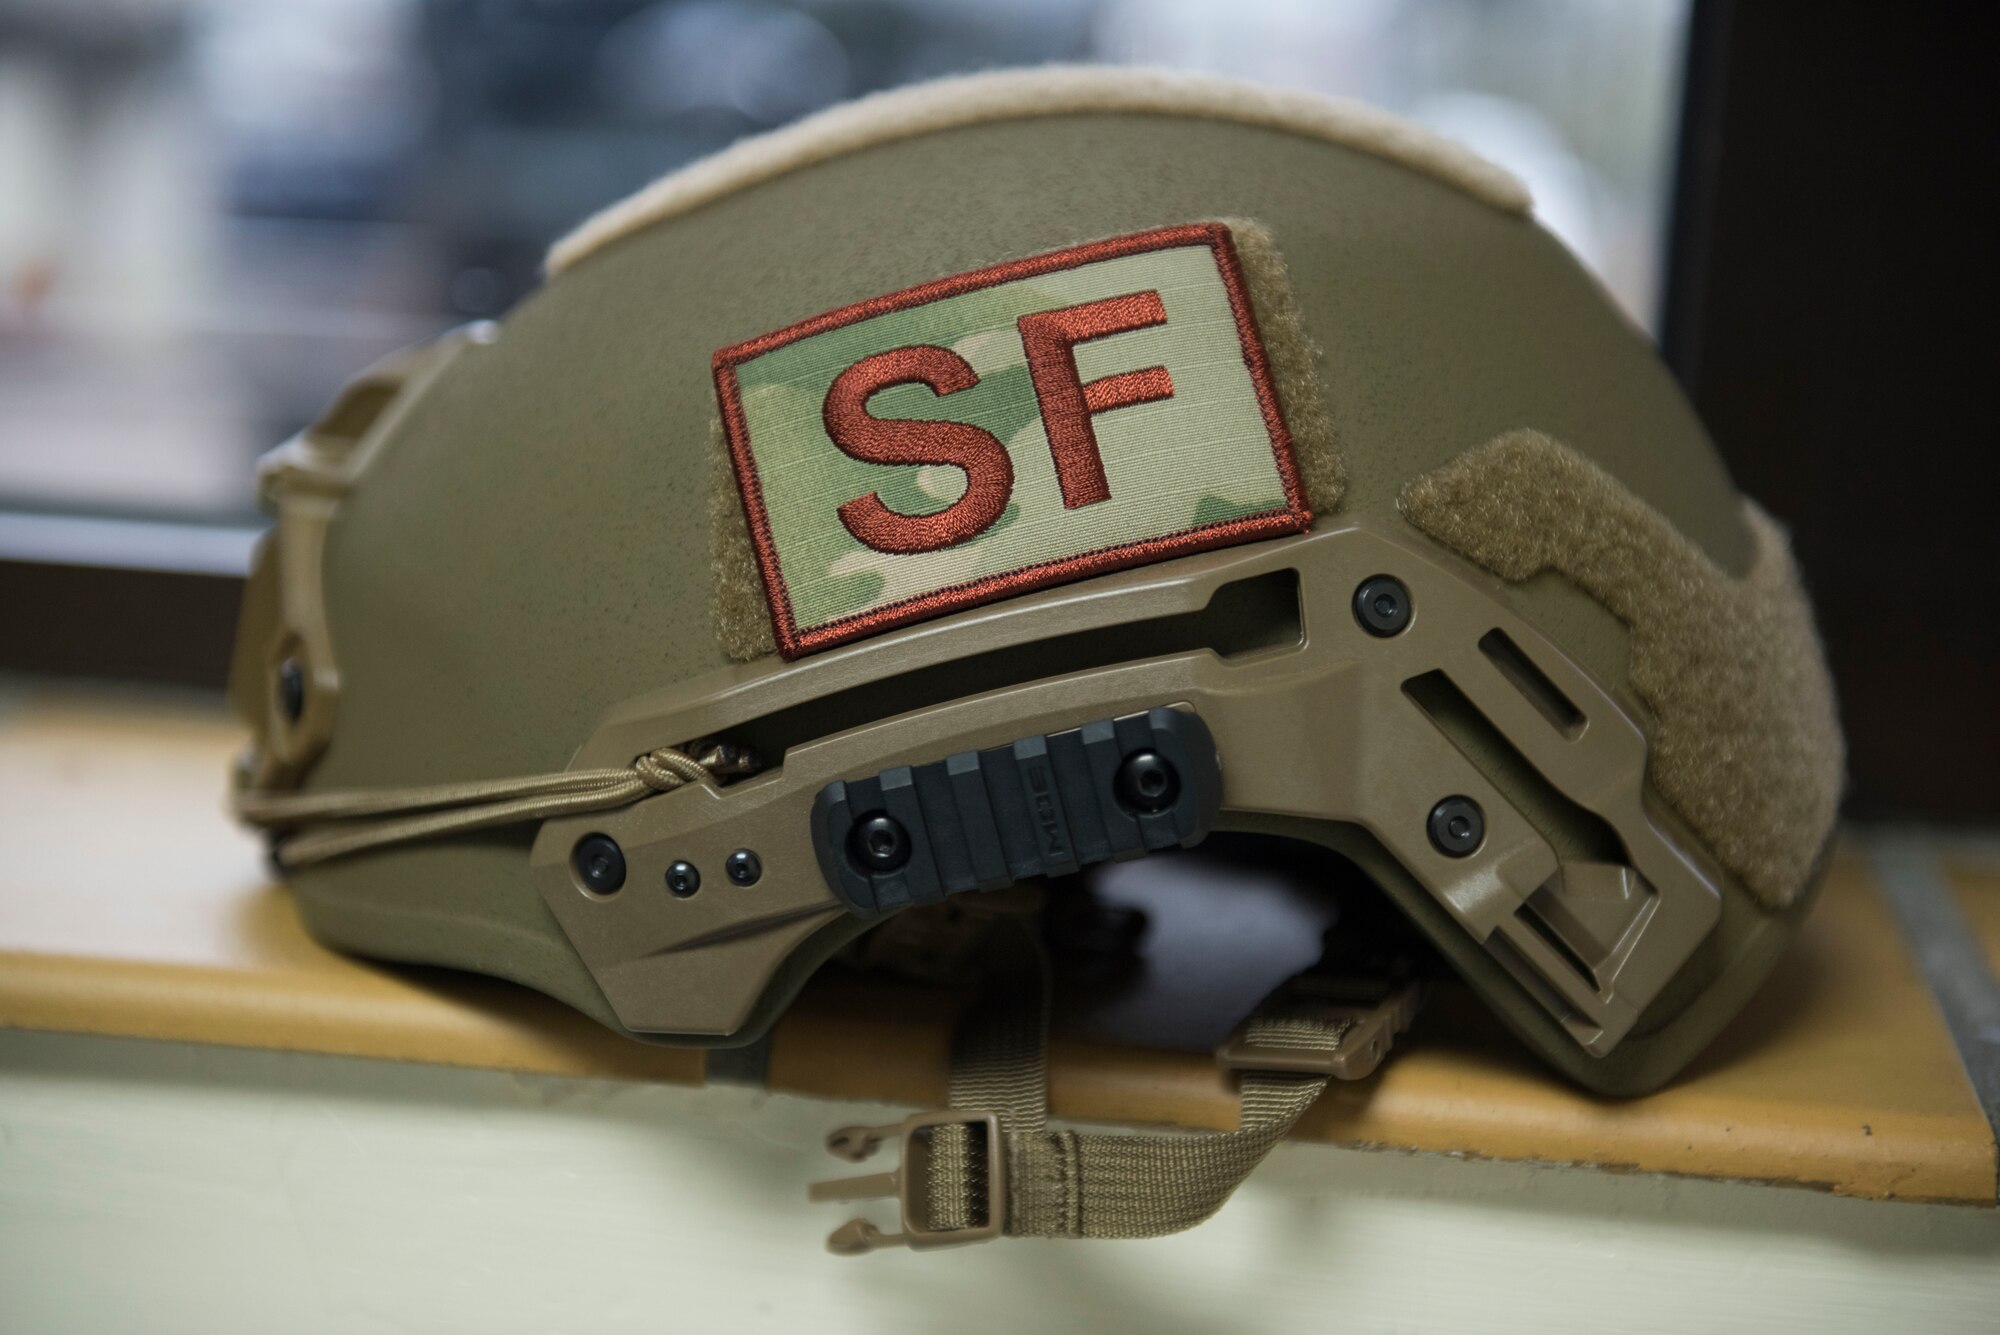 A U.S. Air Force 422nd Security Forces Squadron ballistic helmet lays on the table during a recall exercise at RAF Croughton, England, November 21, 2019. U.S. Air Forces in Europe-Air Forces Africa provided 422nd SFS members with the latest helmet protection to improve hearing and communication with a specially-designed frame, lessen fatigue with a balanced and lighter helmet, and improve capability to hold night-vision goggles. (U.S. Air Force photo by Airman 1st Class Jennifer Zima)